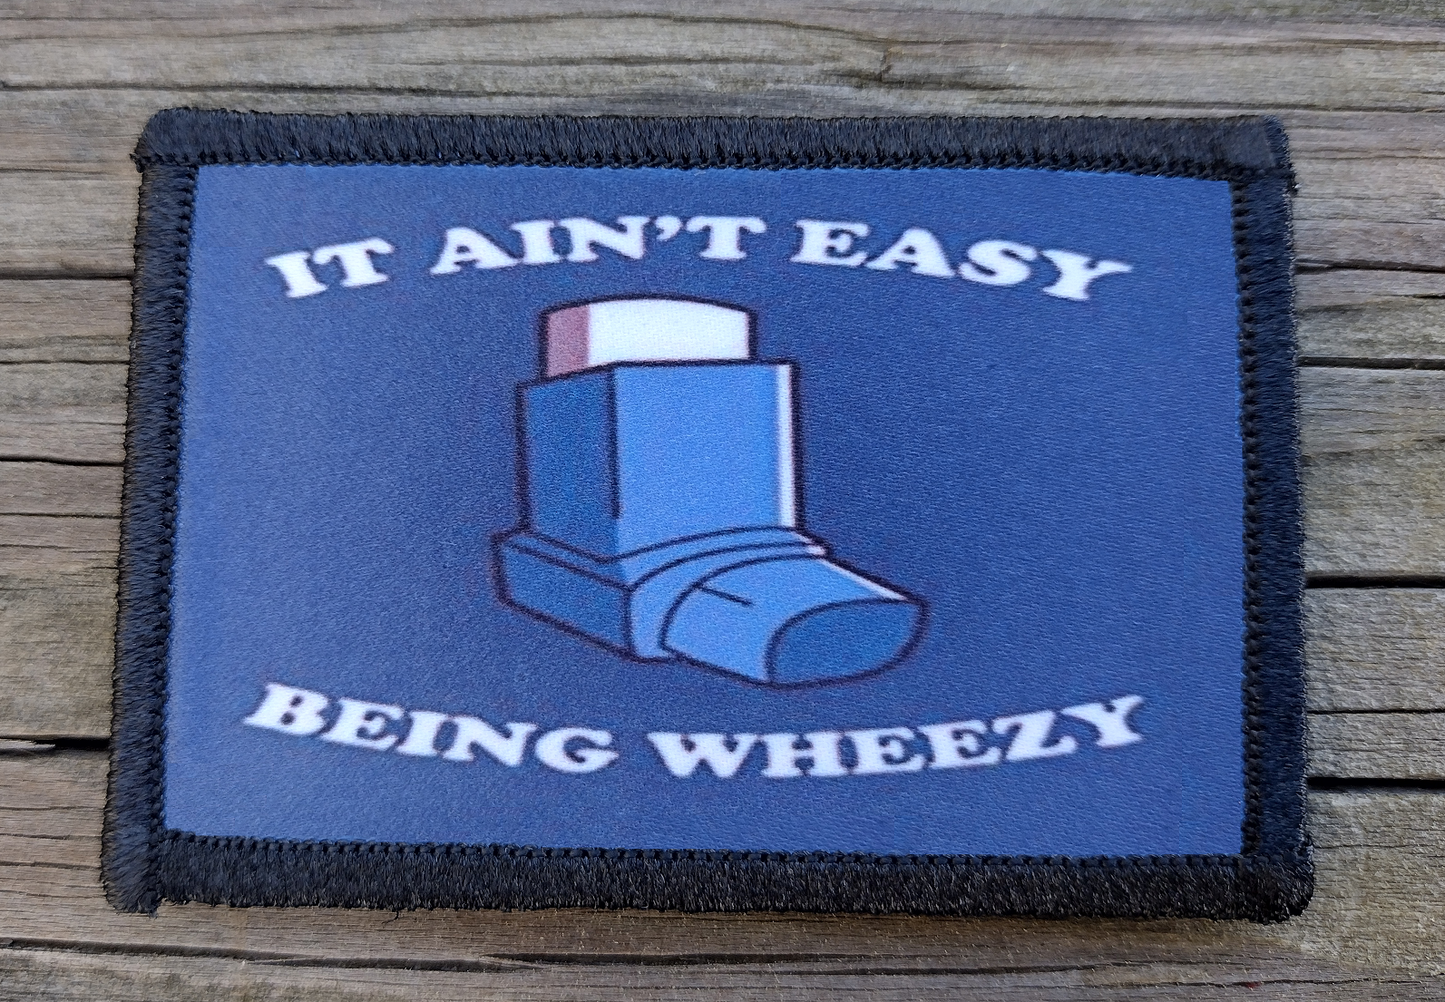 It Aint Easy Being Wheezy Morale Patch